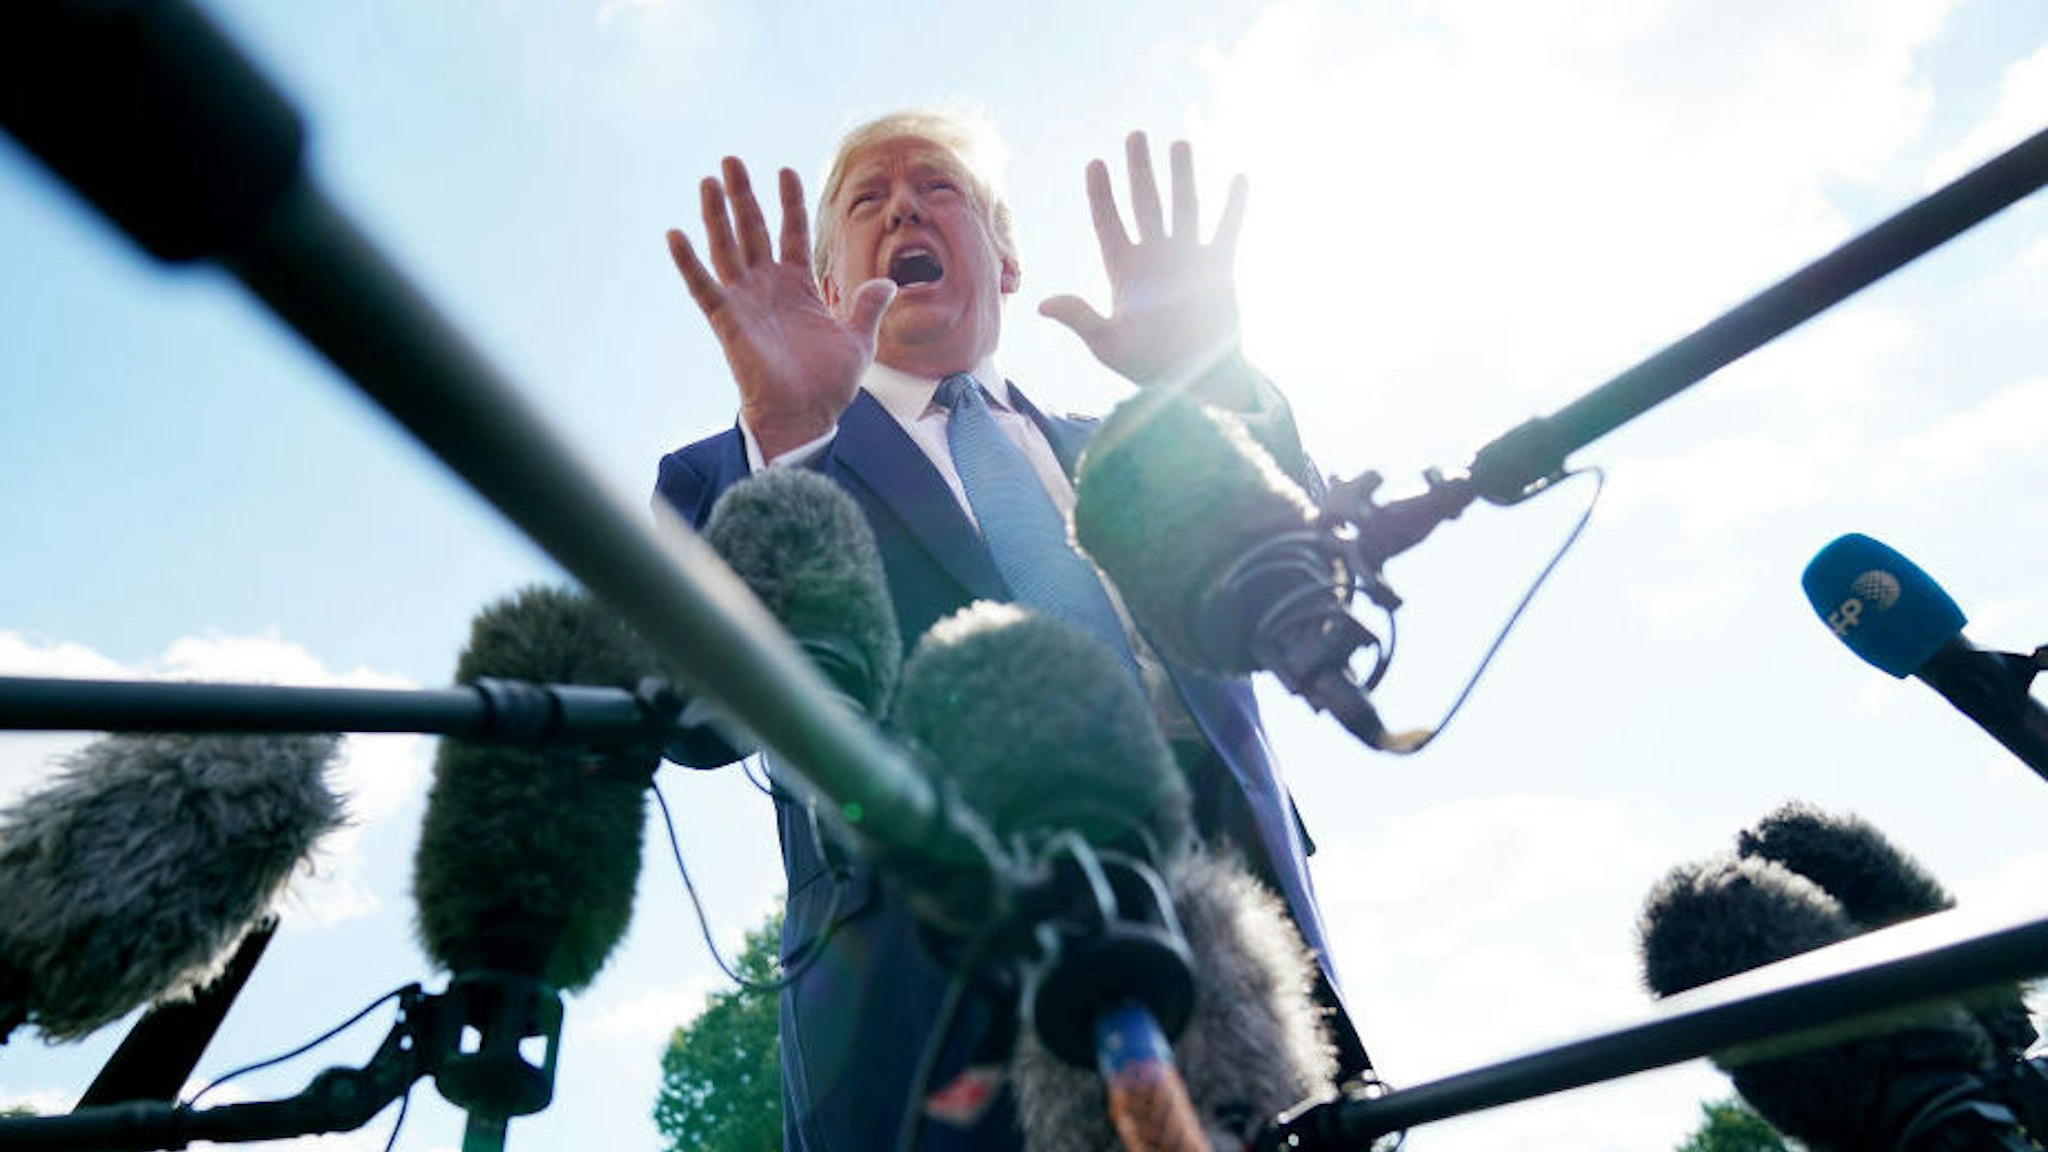 U.S. President Donald Trump talks to journalists on the South Lawn of the White House before boarding Marine One and traveling to Walter Reed National Military Medical Center October 04, 2019 in Washington, DC. According to the White House, Trump will be visiting injured military service members. (Photo by Chip Somodevilla/Getty Images)